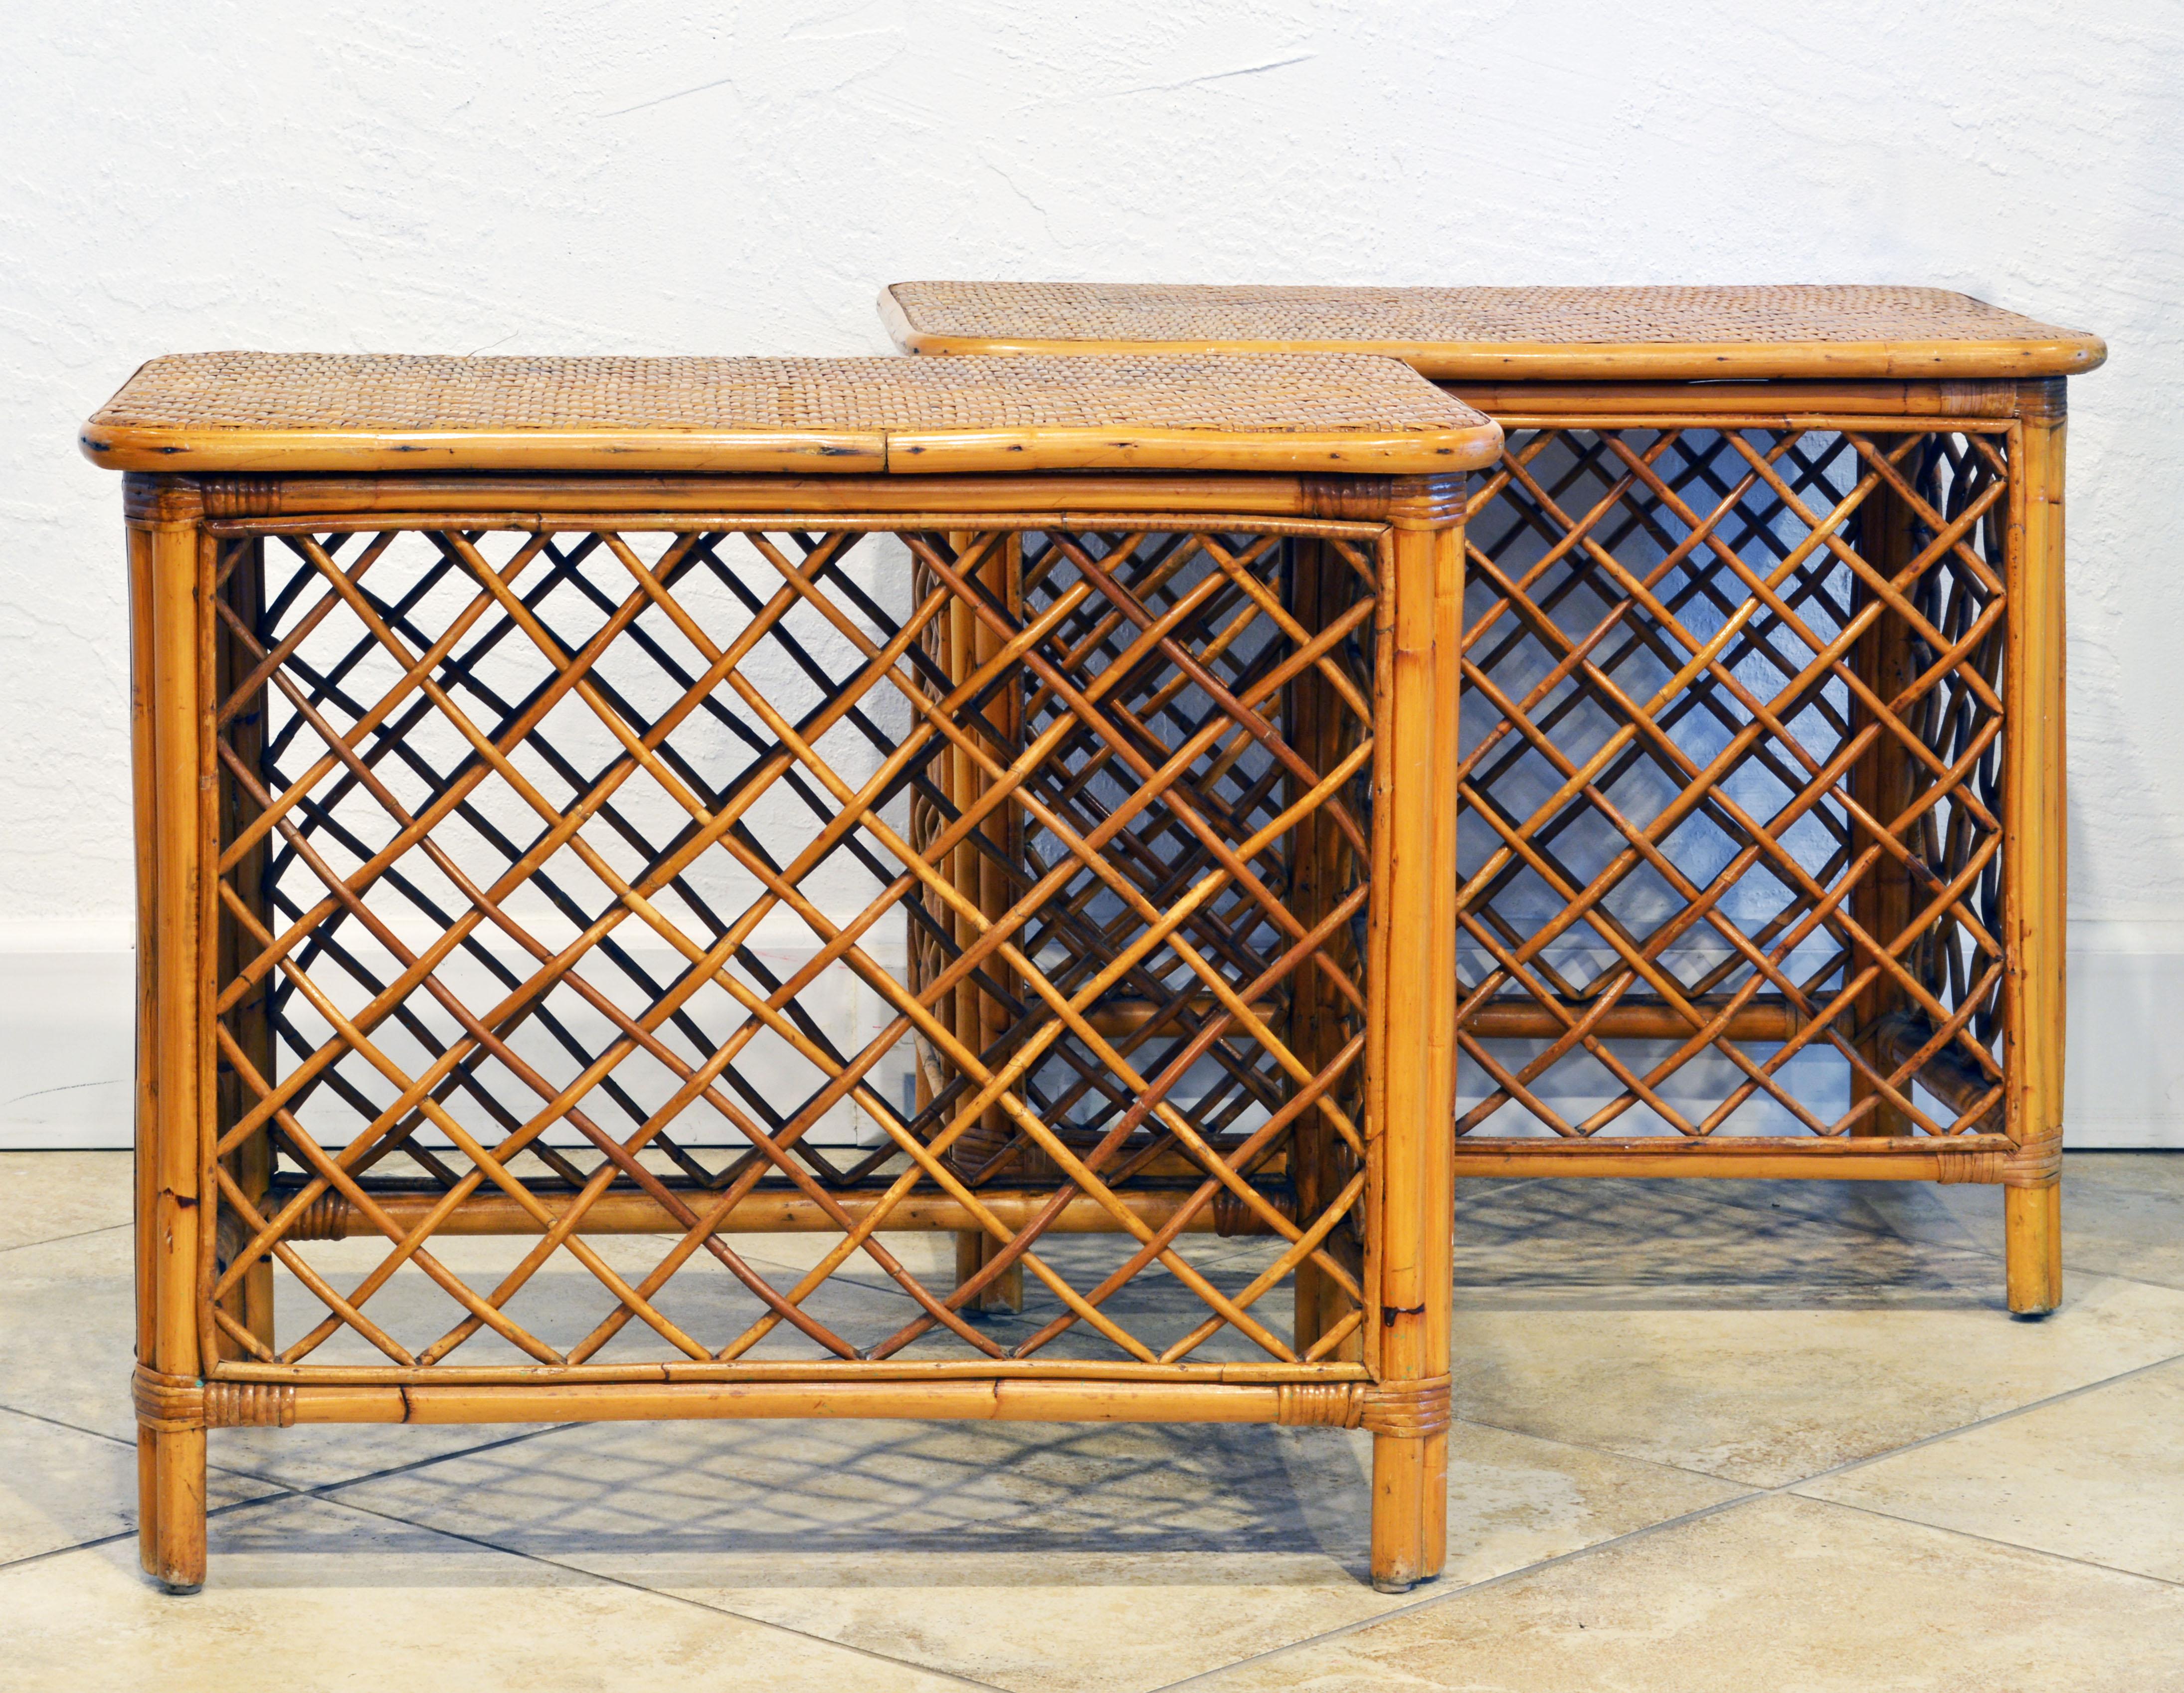 This pair of Dominican Republic rattan side tables in the plantation style also have owners metal plagues showing that they once belonged to a fruit plantation. Both chairs also have maker's labels, please see photos.